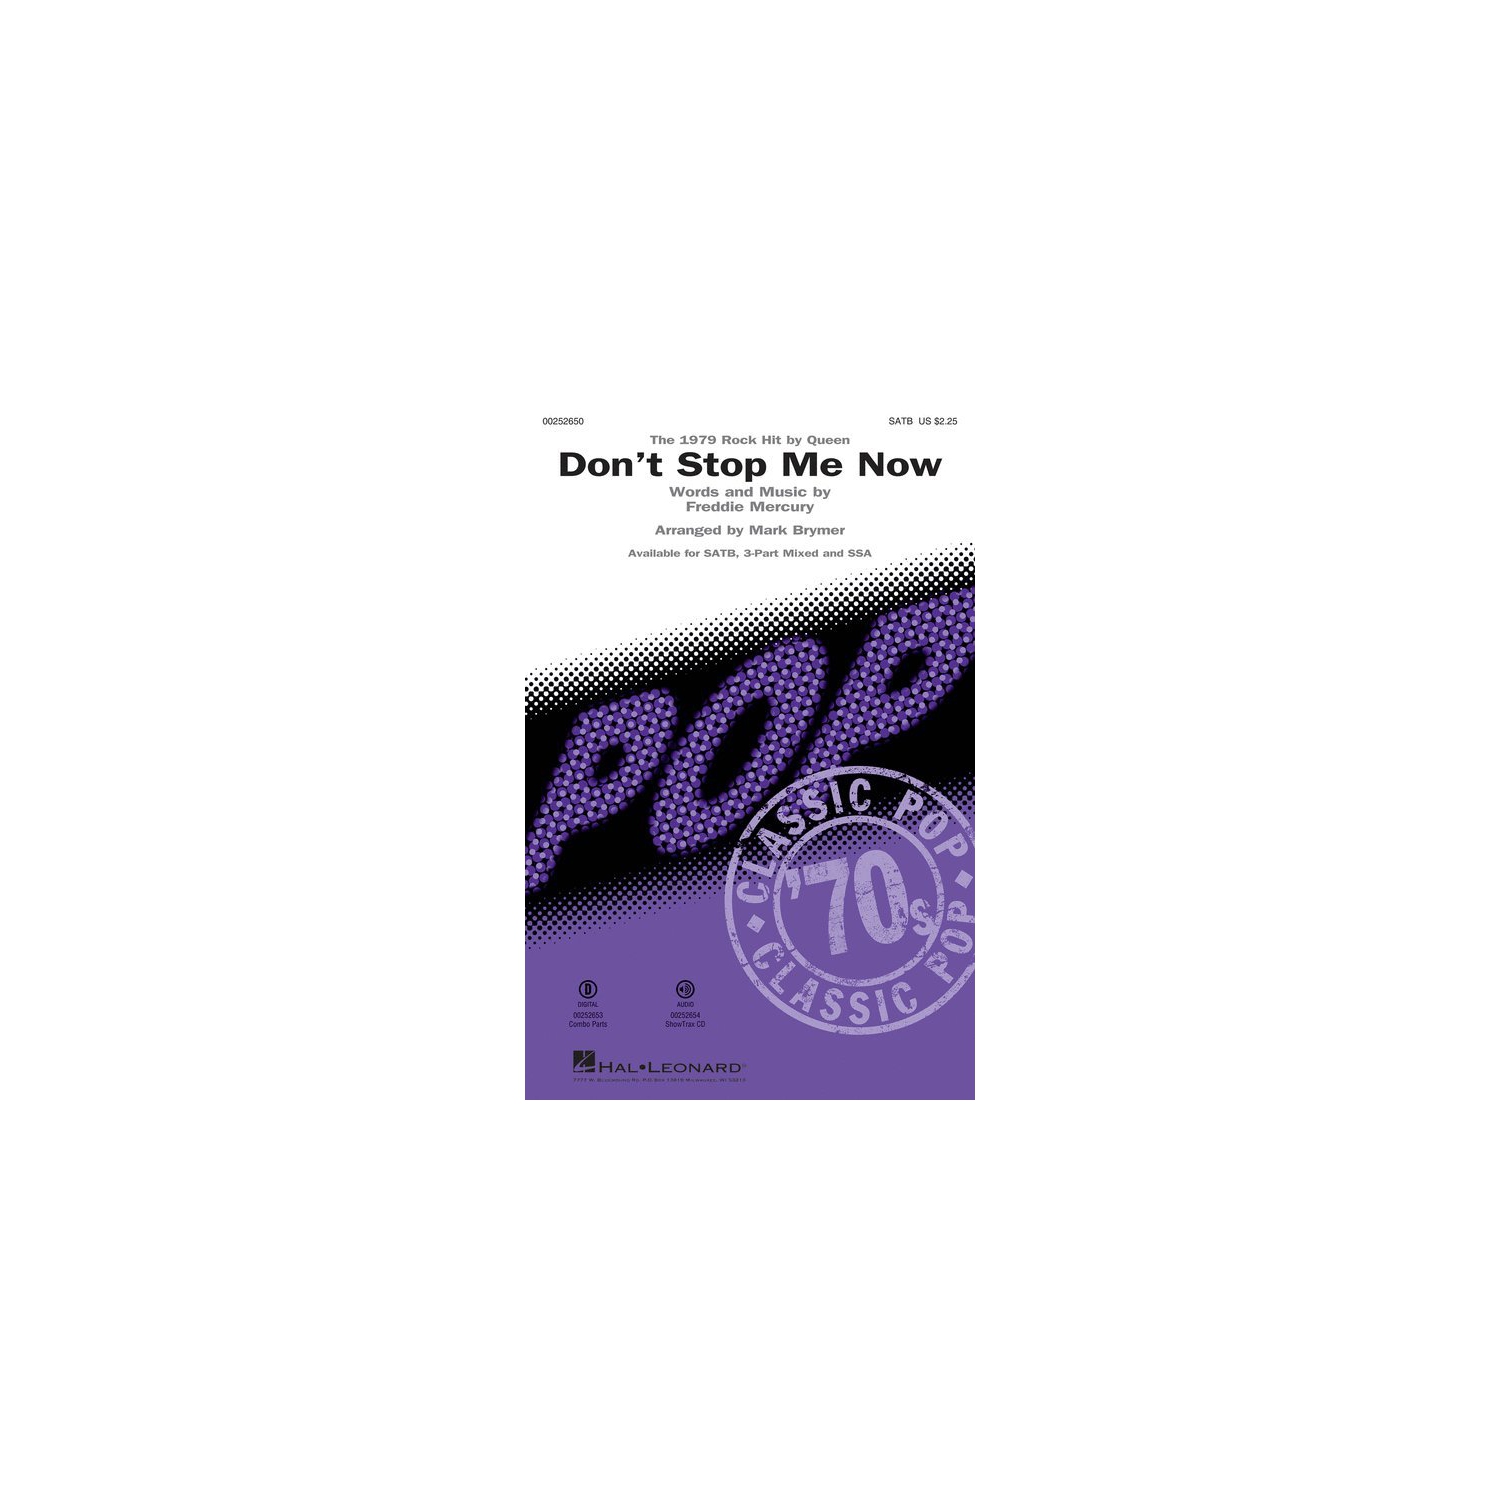 Don't Stop Me Now (Queen) - Showtrax CD